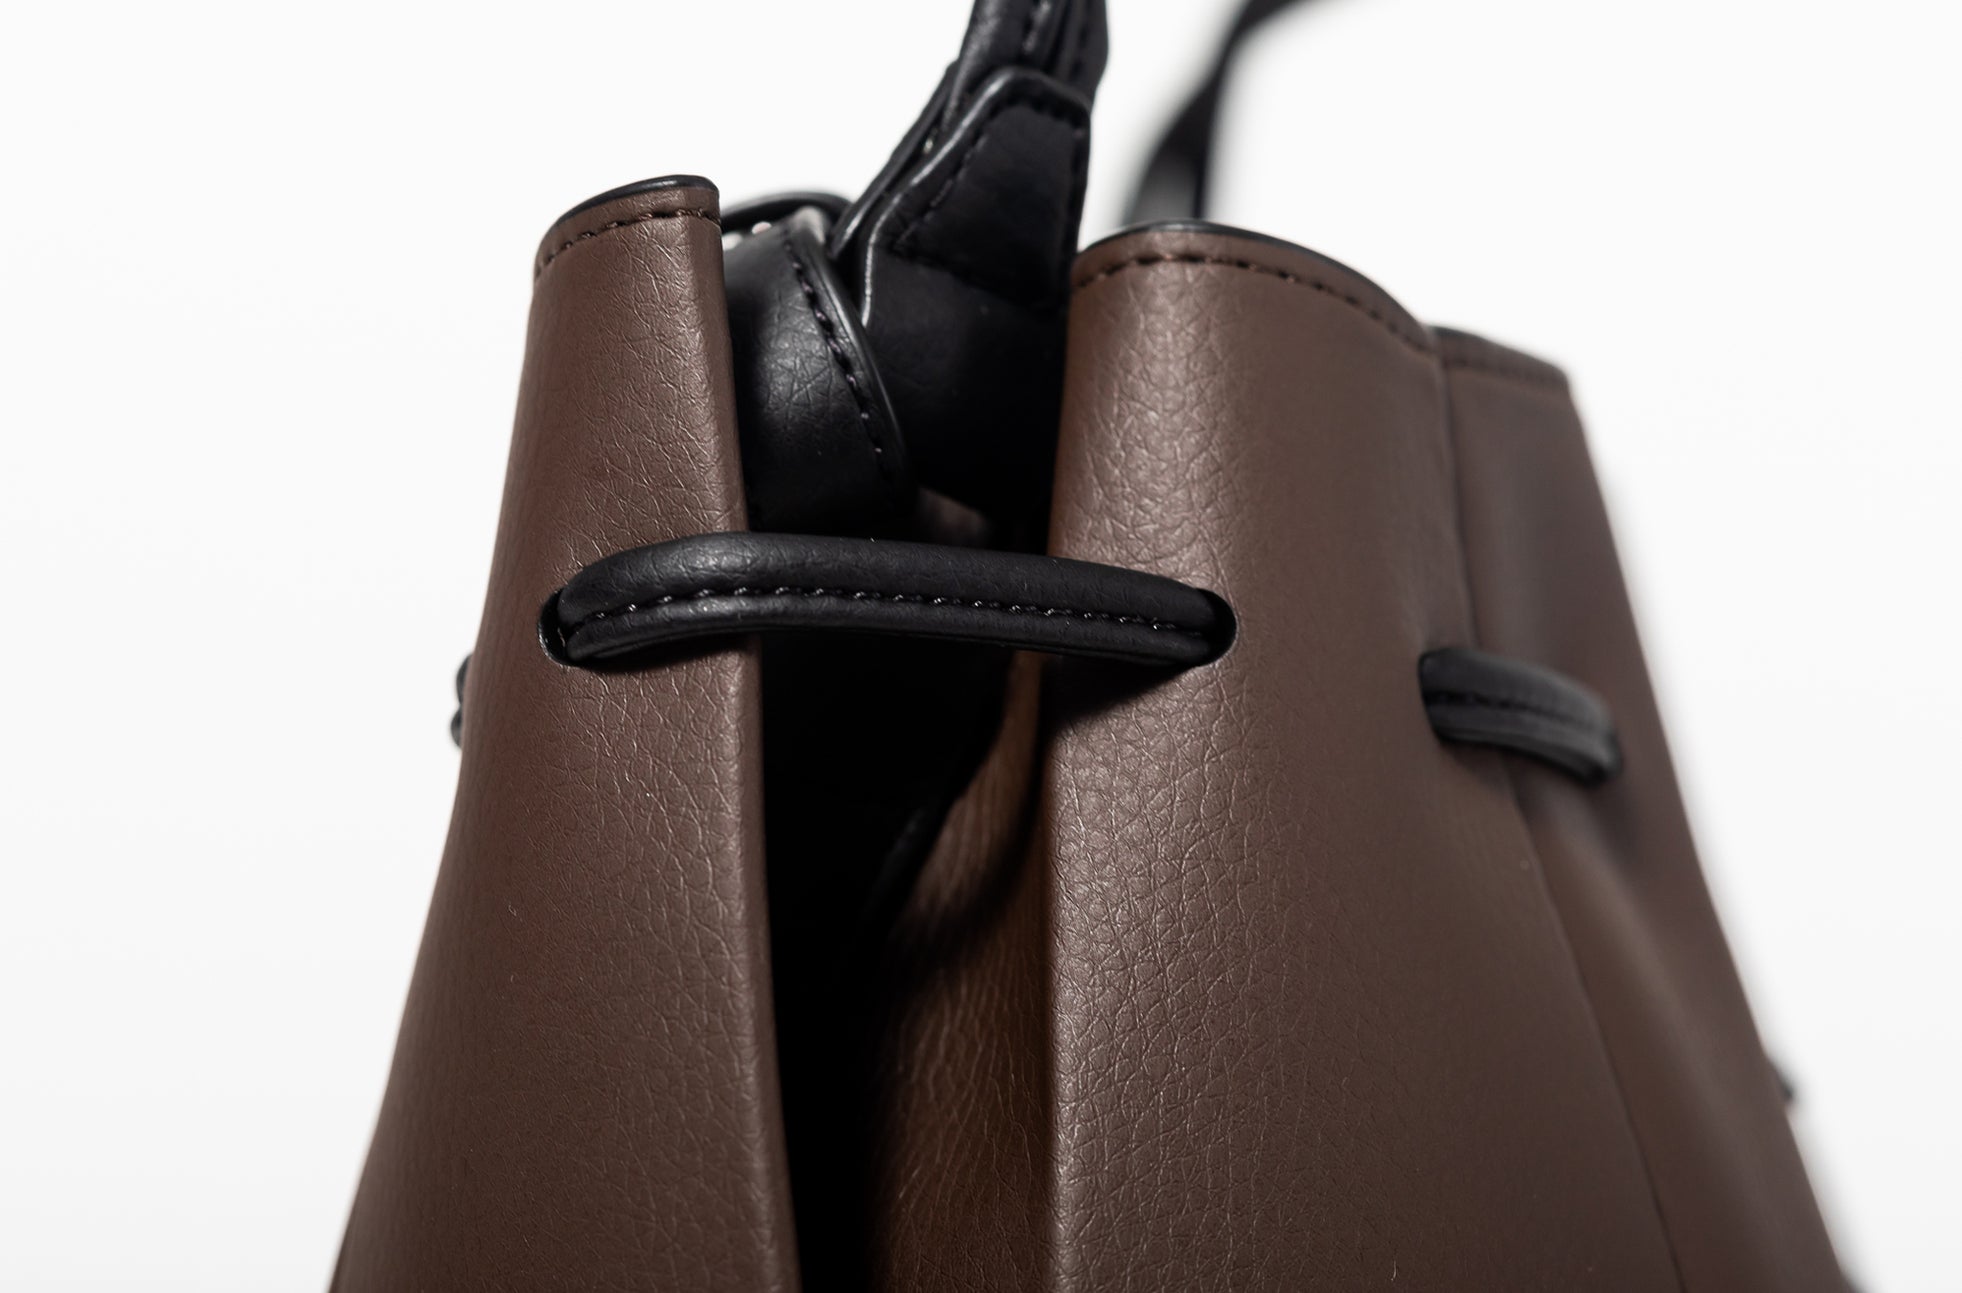 The Bucket Crossbody in Technik-Leather in Taupe & Black  image 6